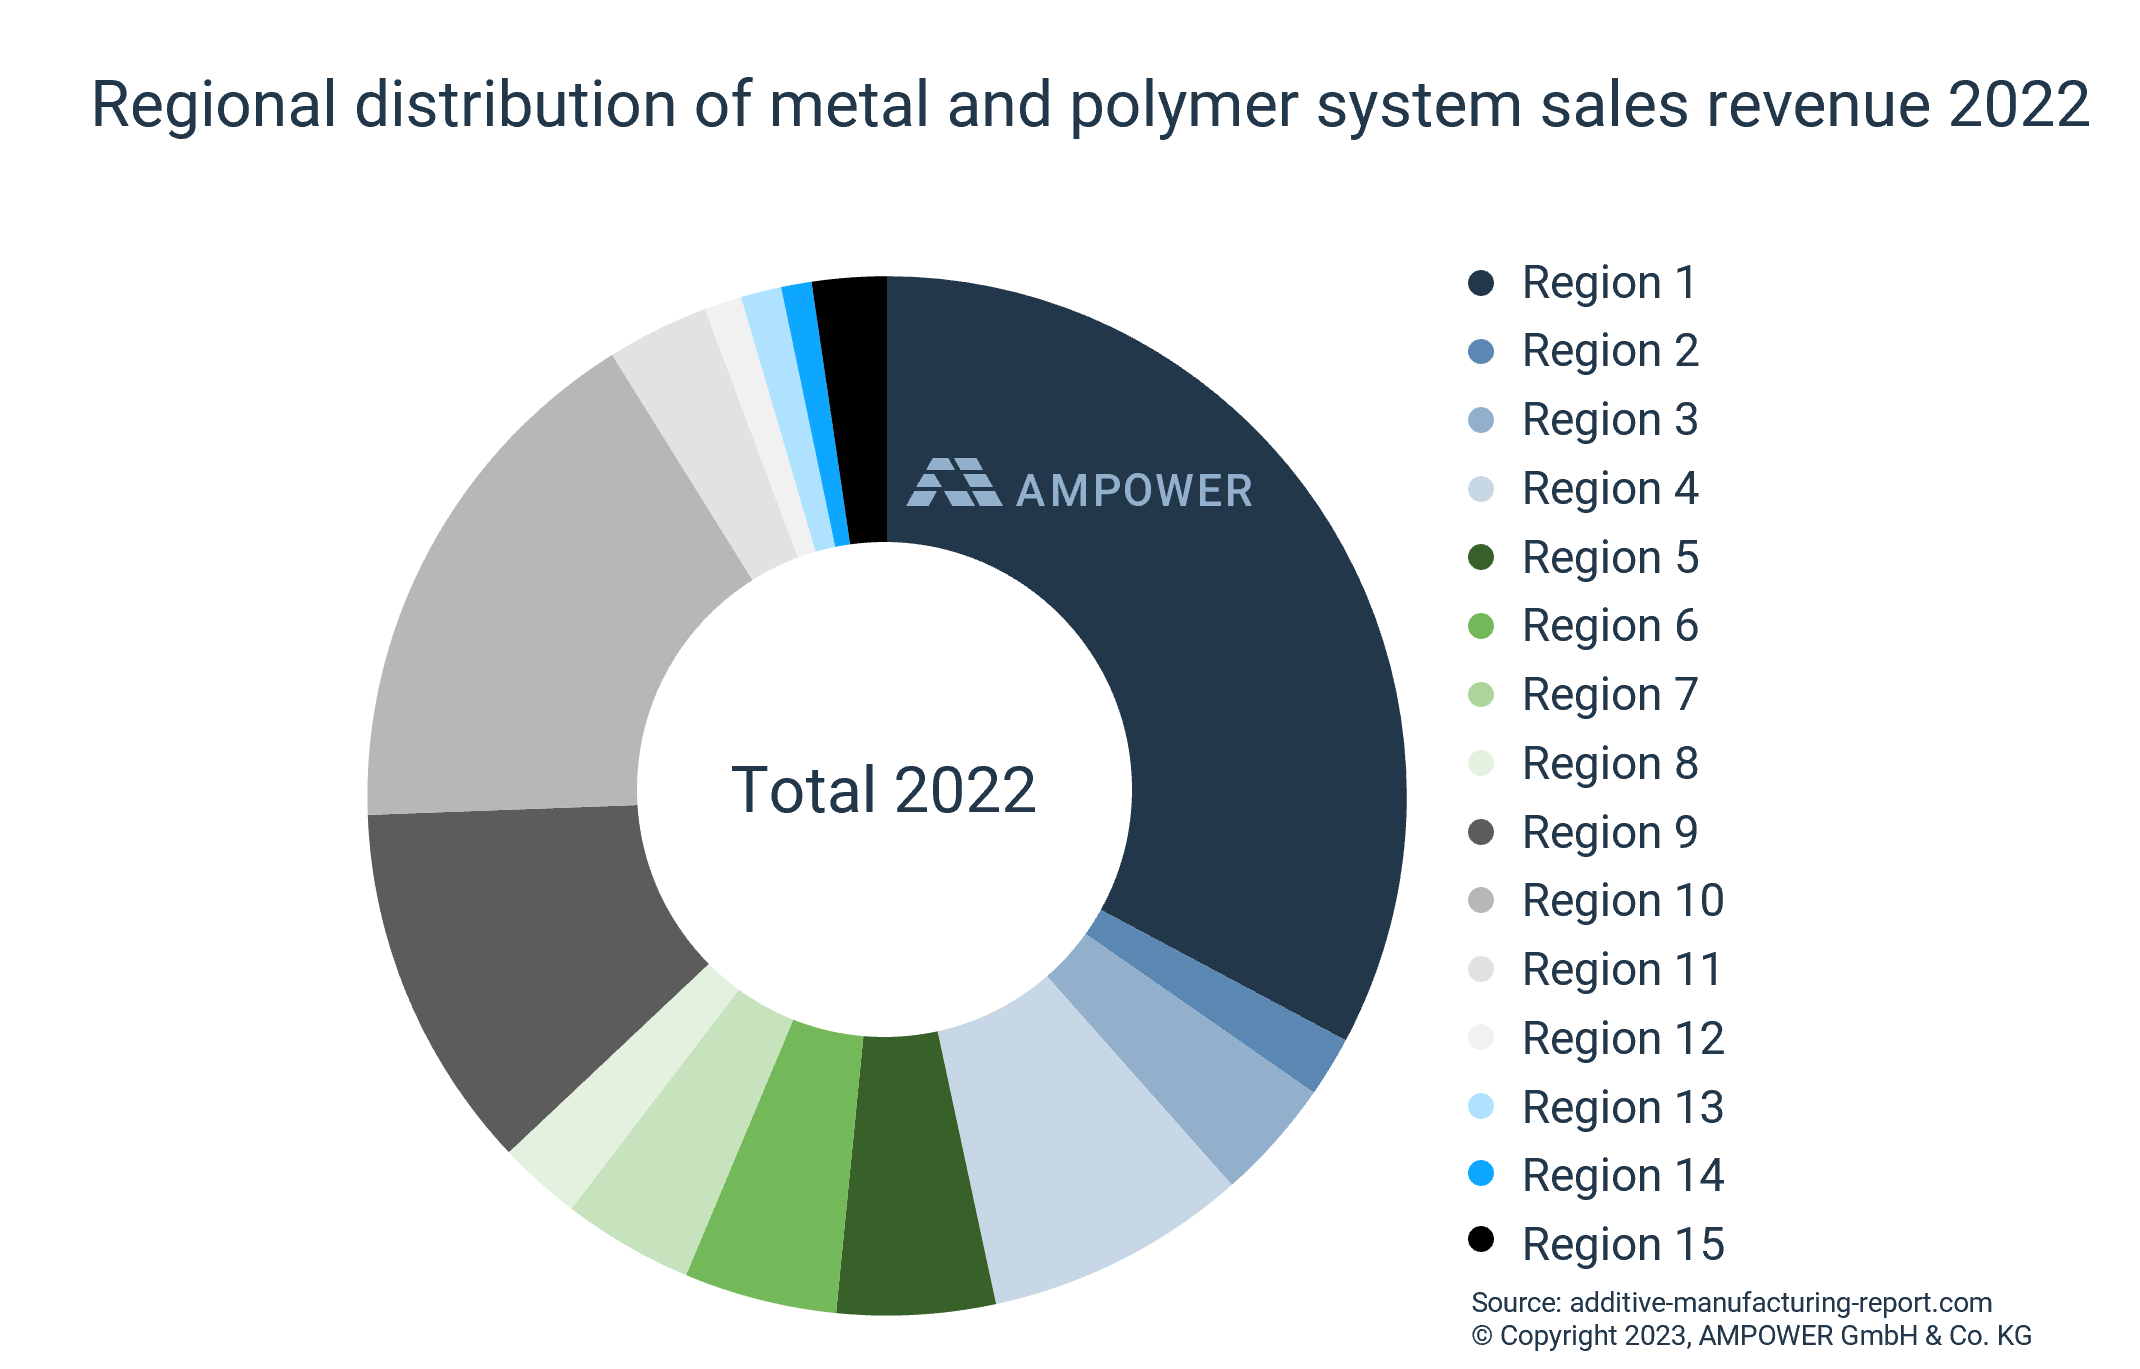 Regional distribution of metal and polymer system sales revenue 2022 dummie